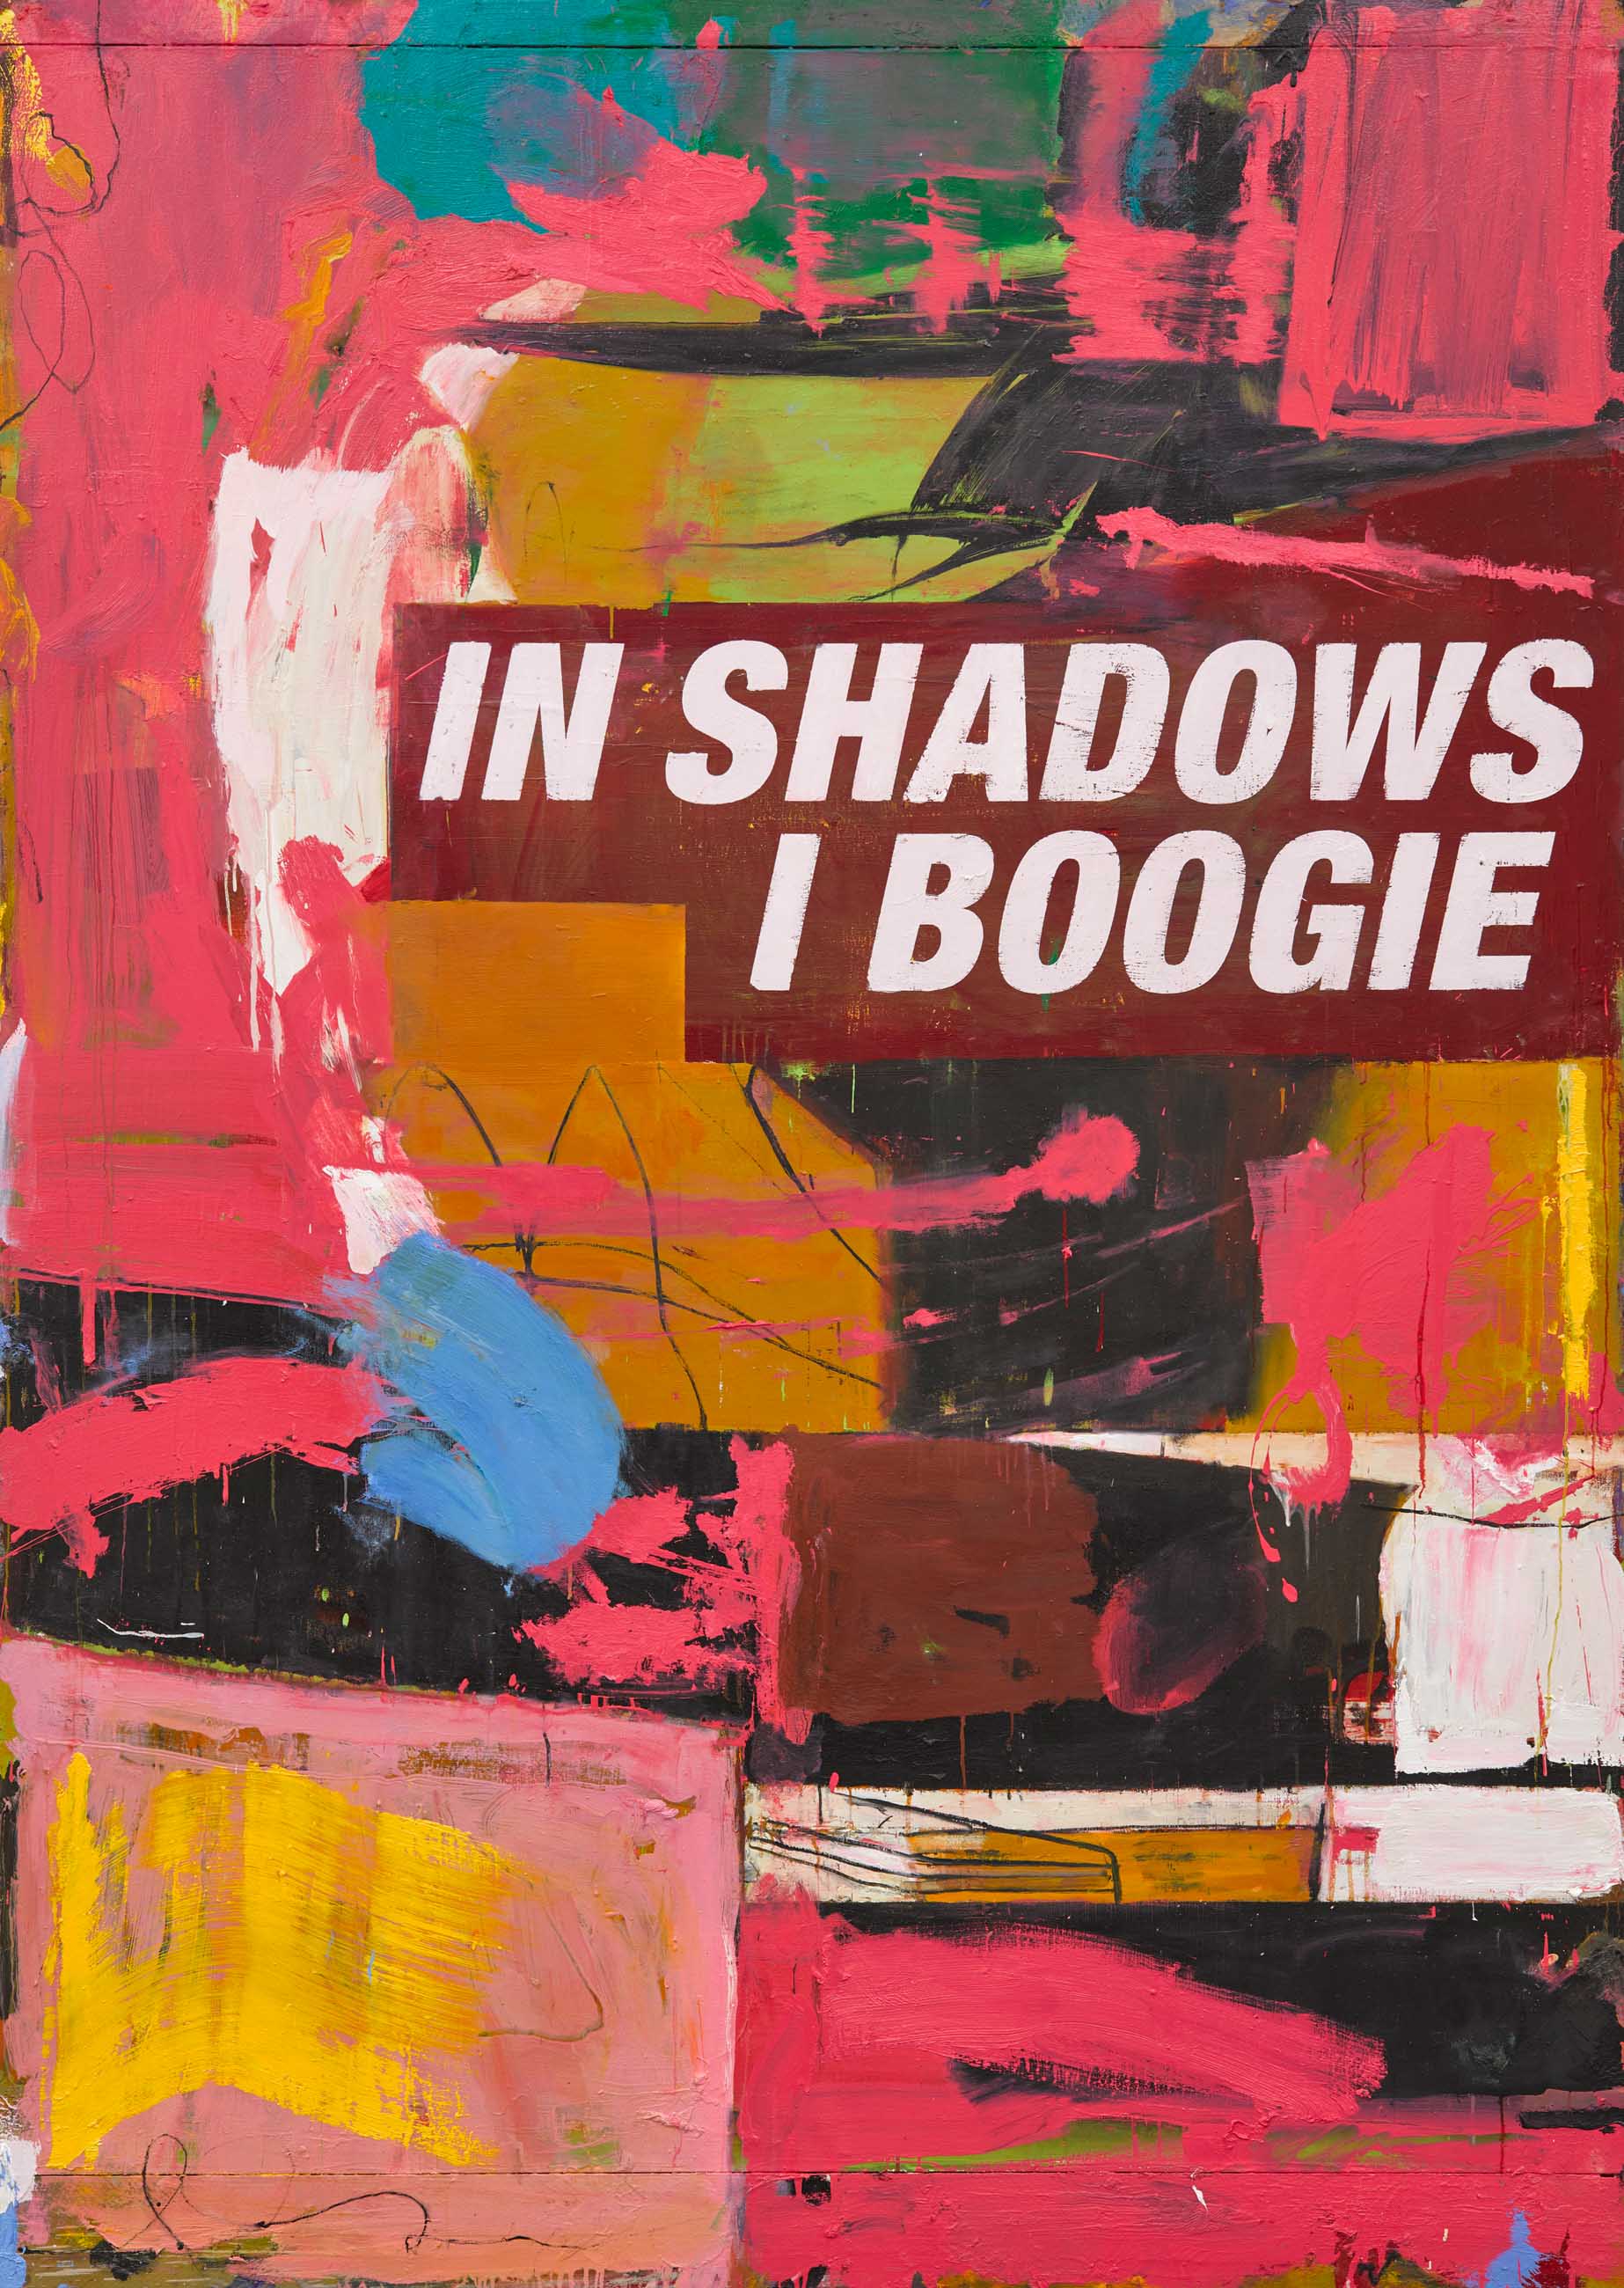 Harland Miller - In shadows I boogie